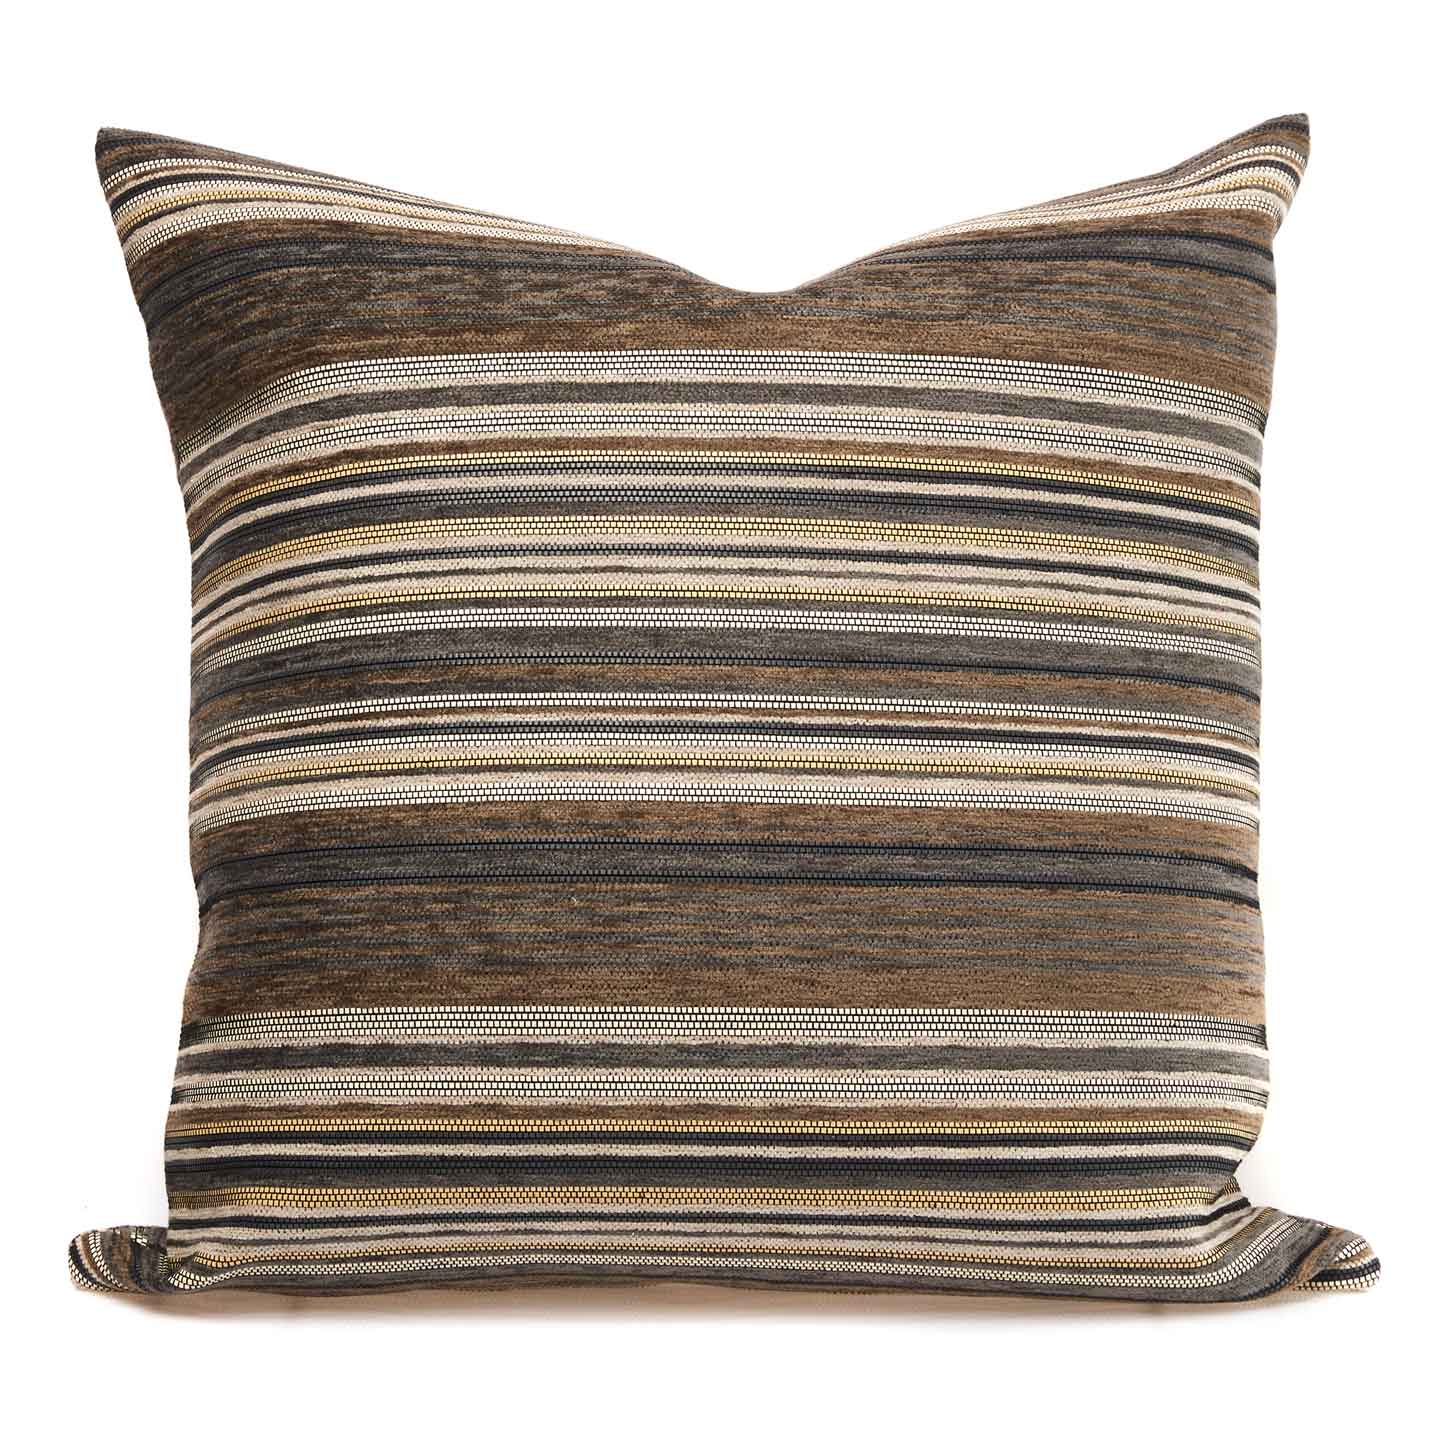 The Melissa pillow by Beau Home